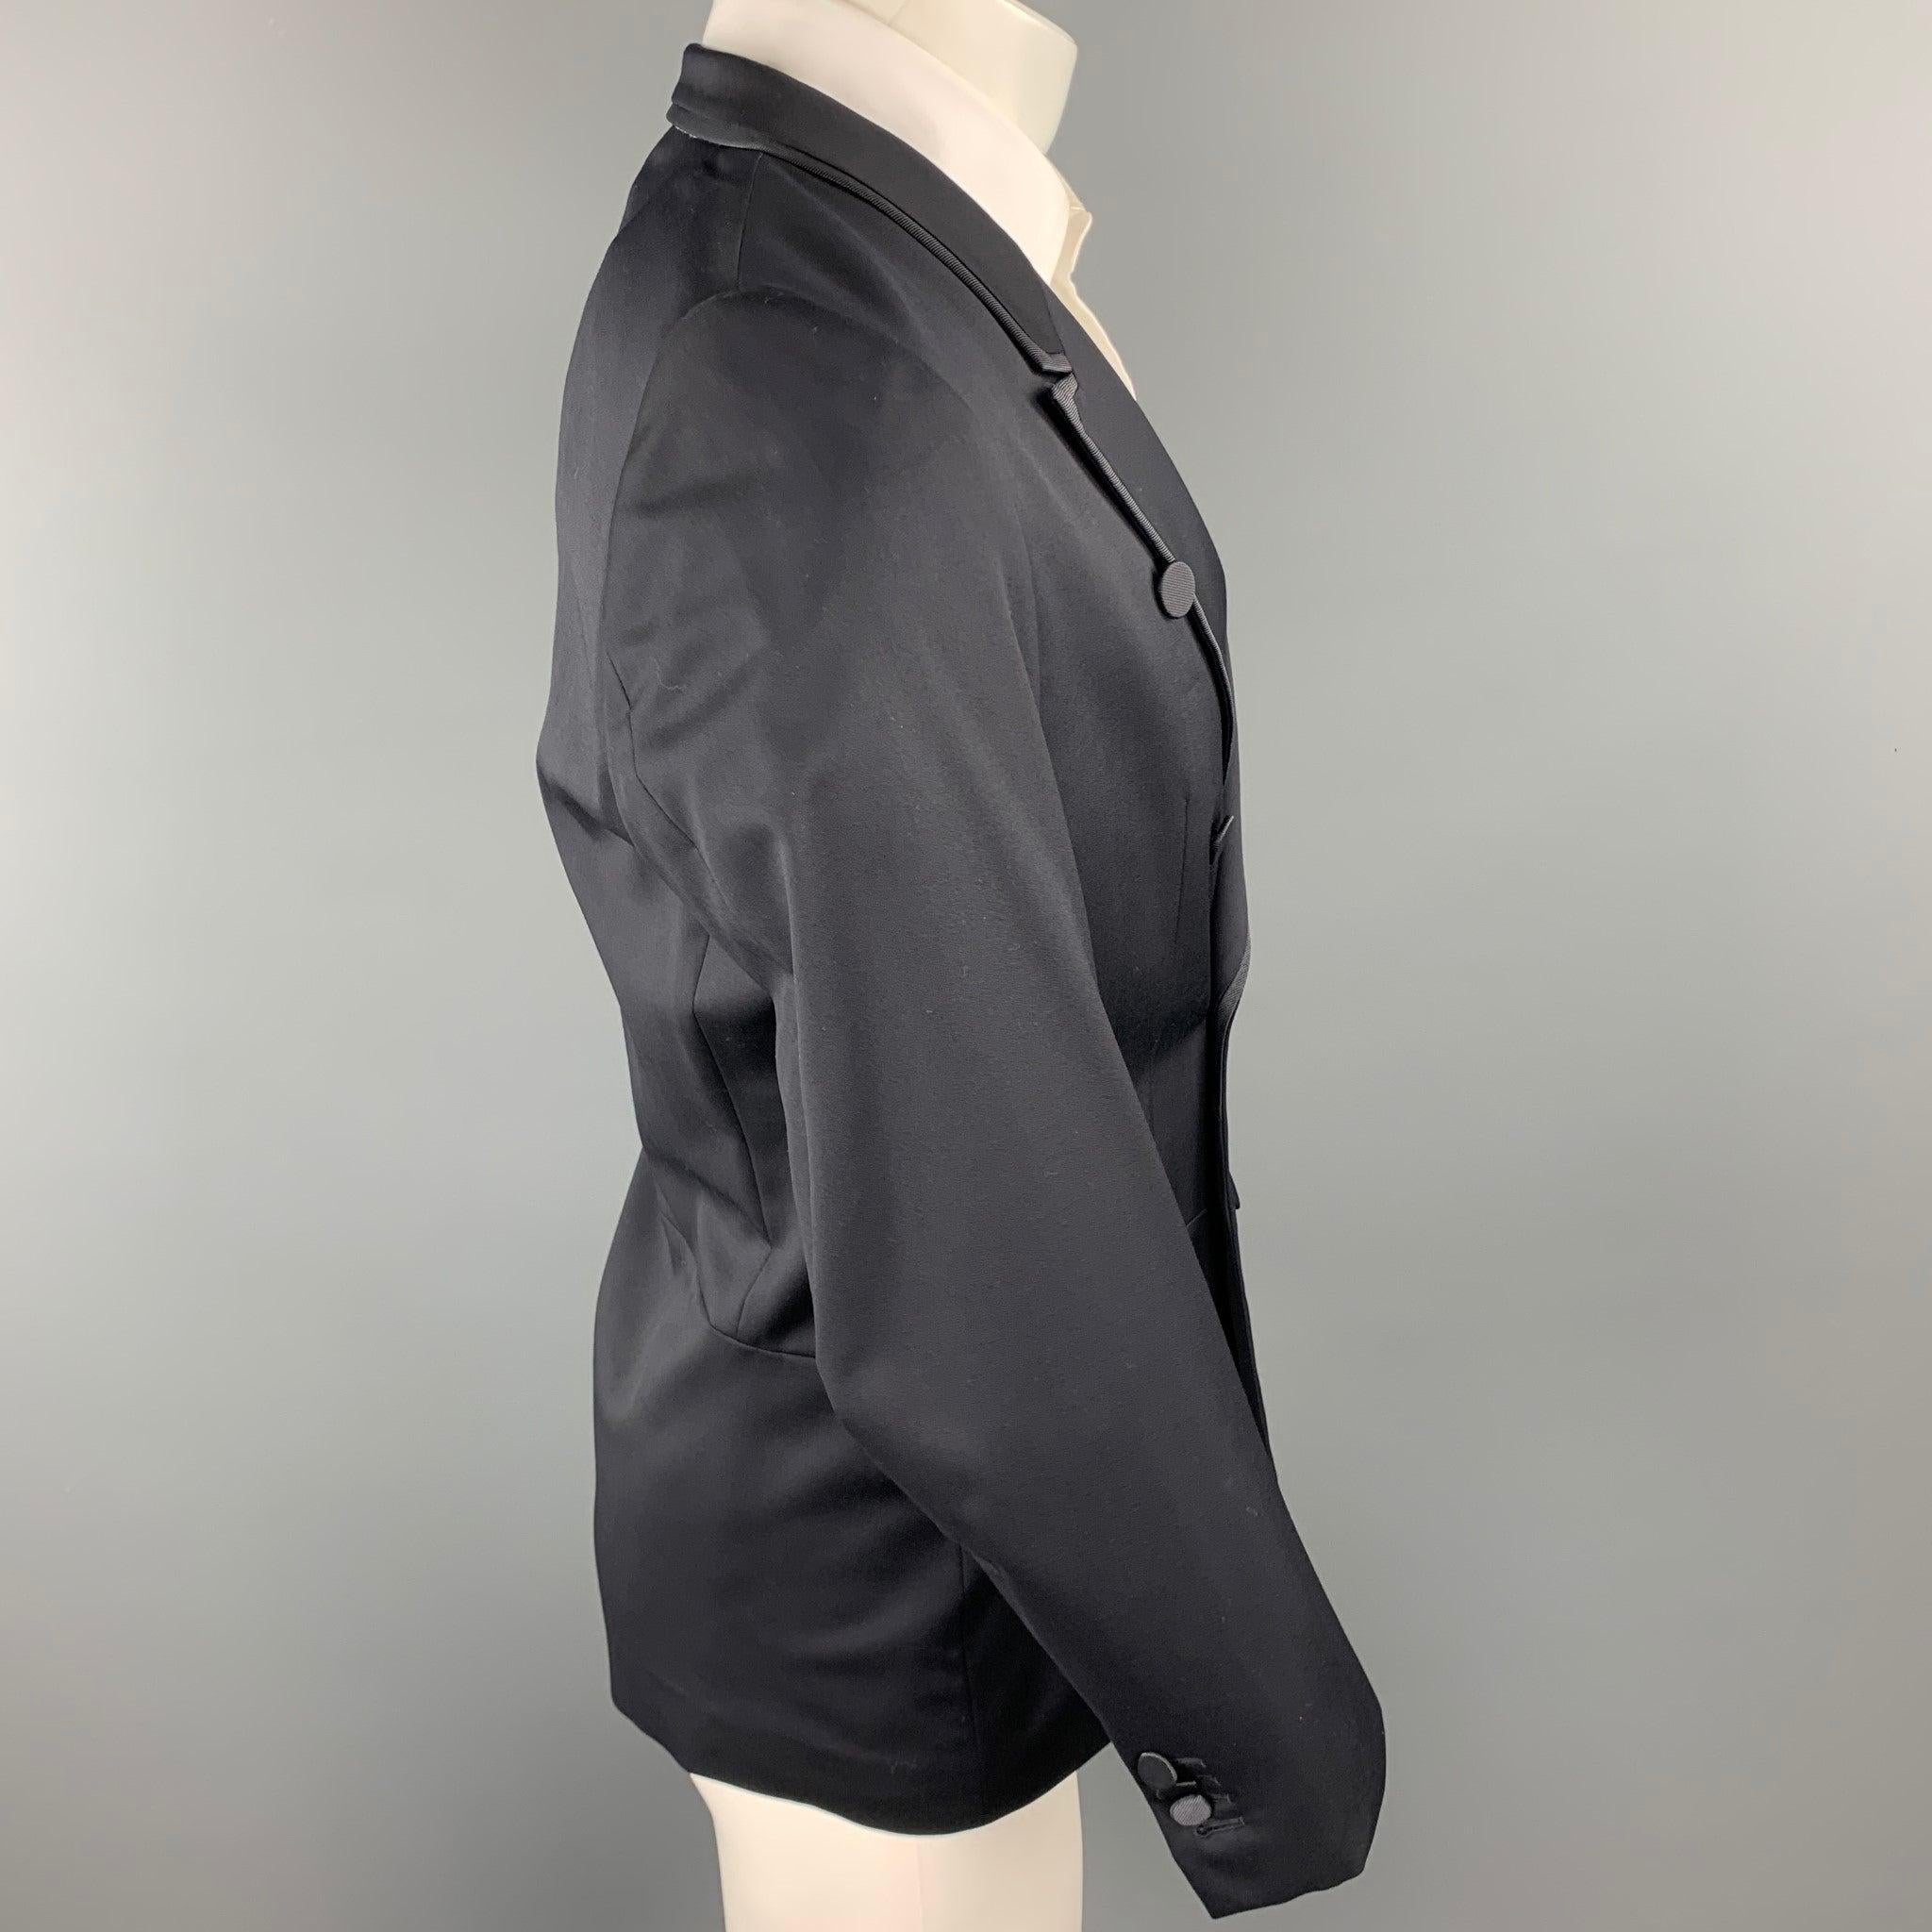 PAUL SMITH Size 38 Black Wool / Cashmere Tuxedo Sport Coat In Good Condition For Sale In San Francisco, CA